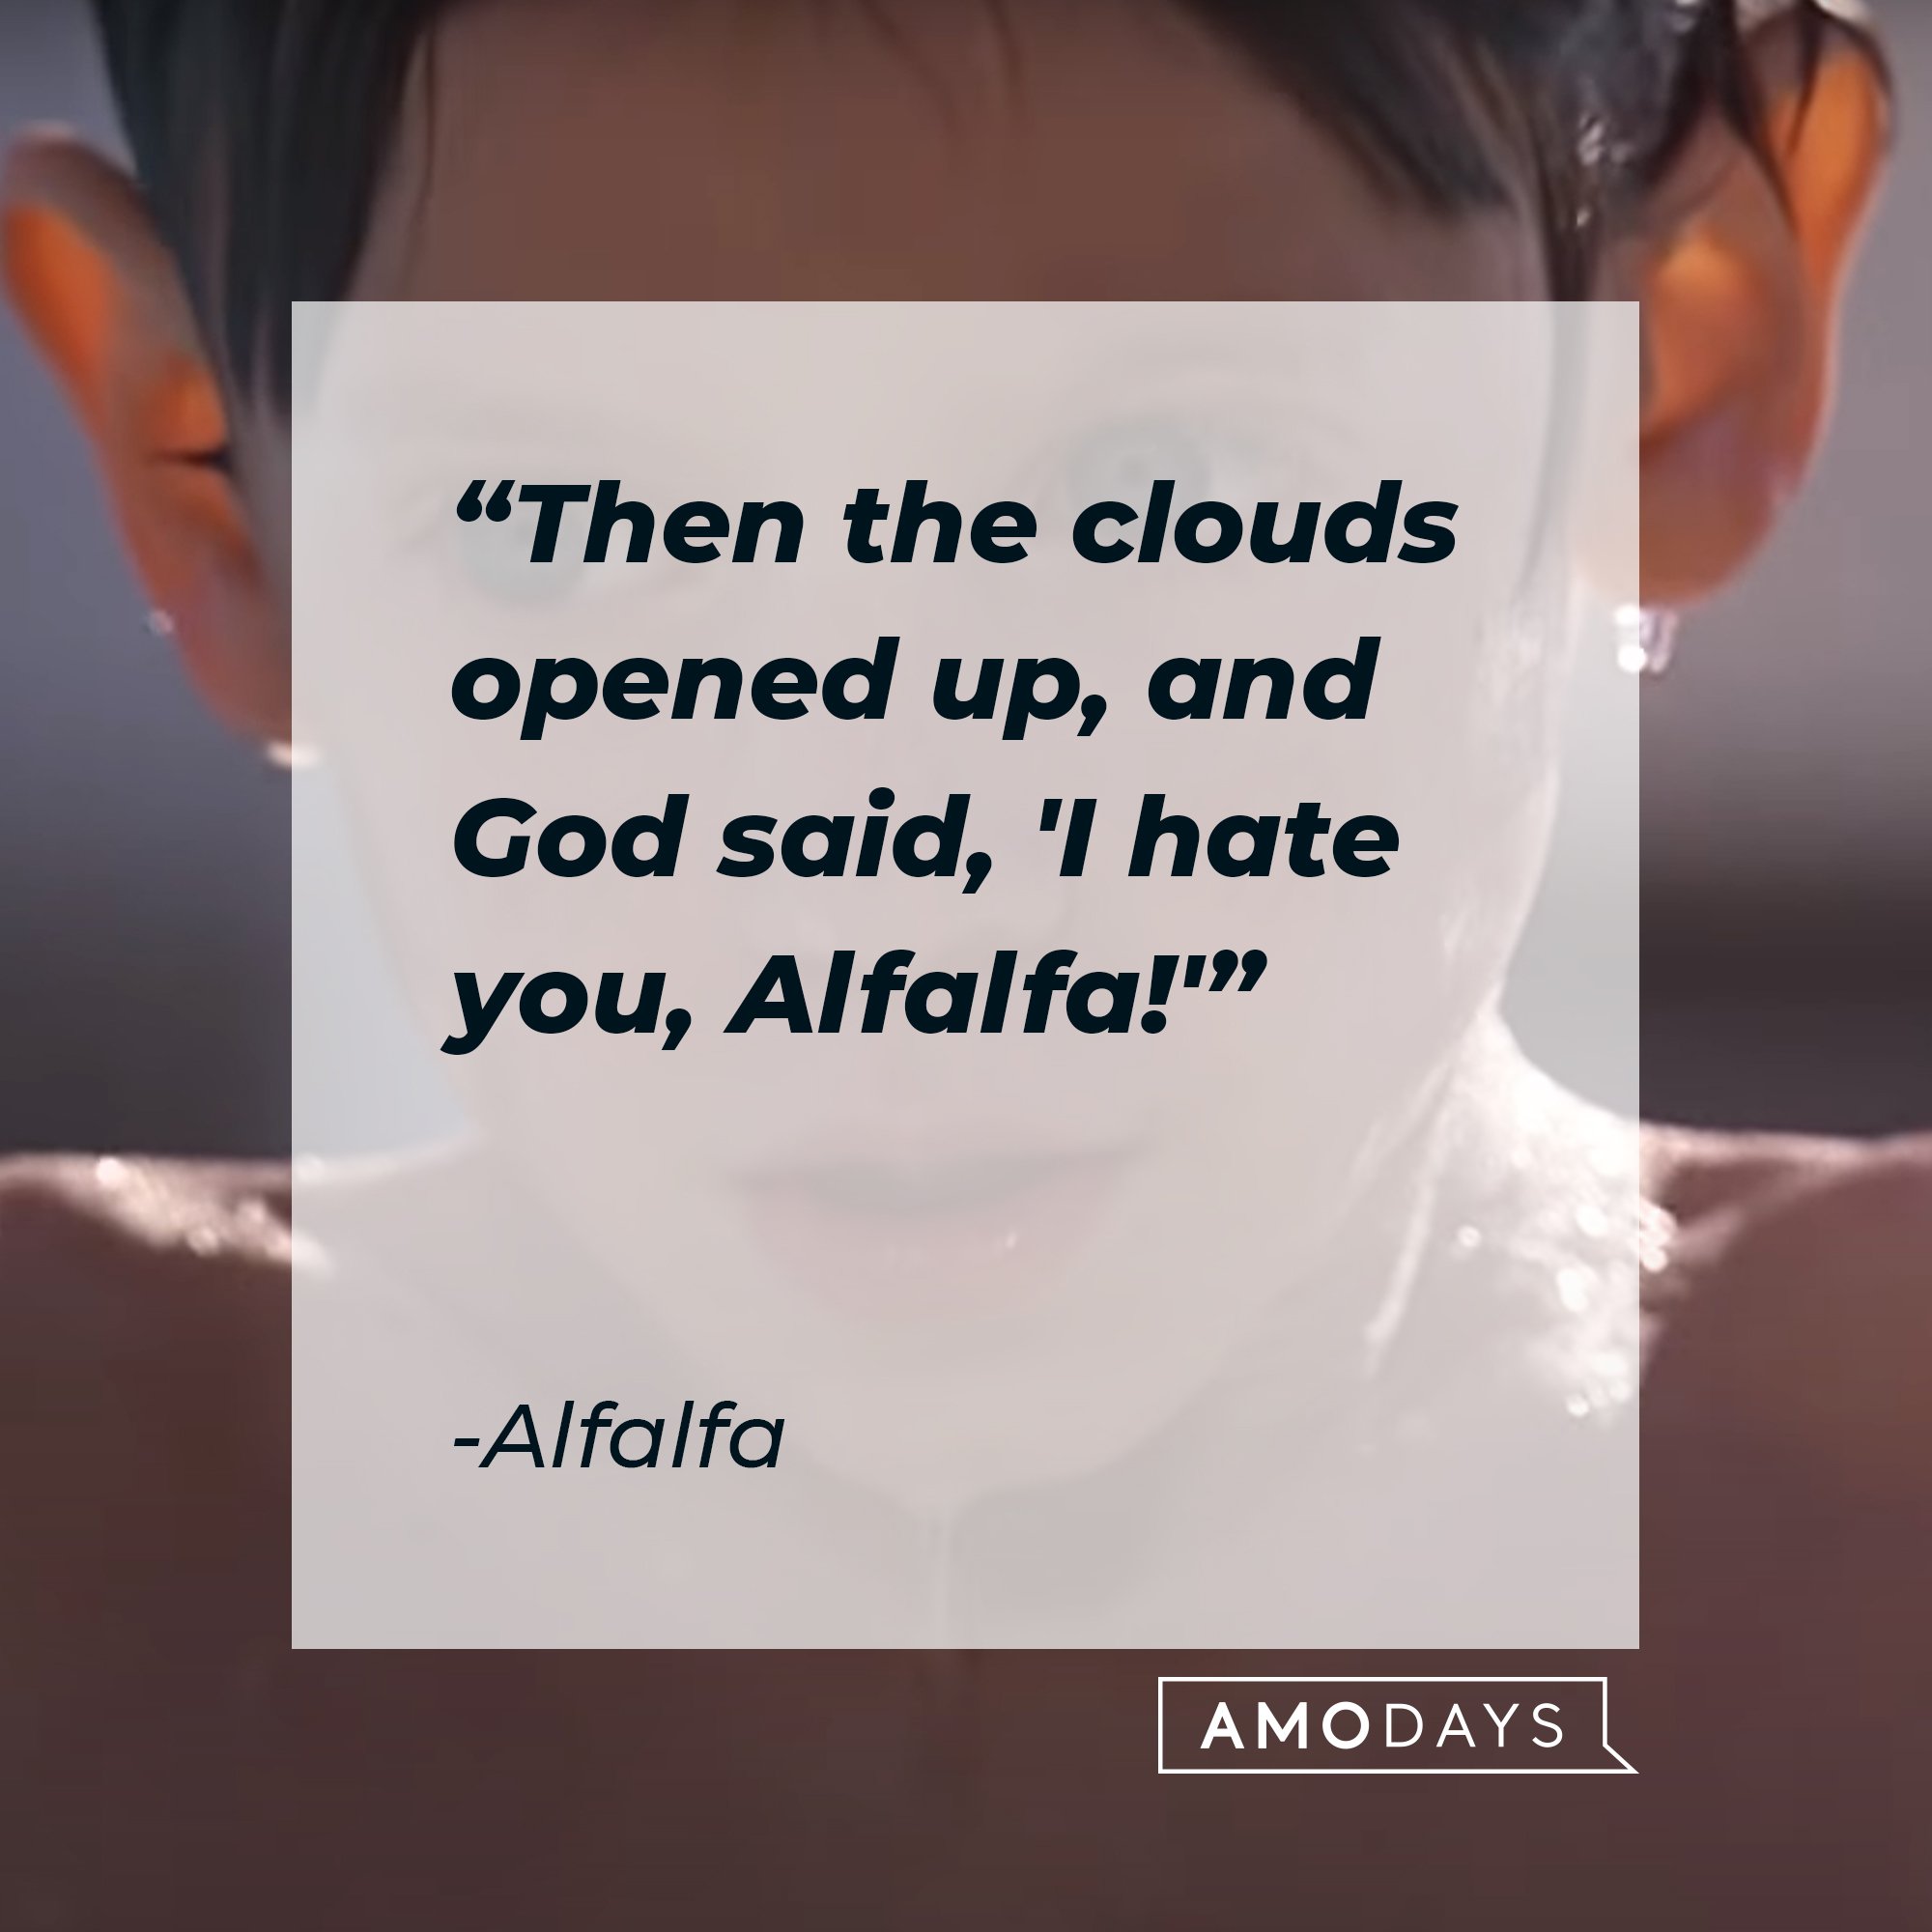 Alfalfa’s quote: "Then the clouds opened up, and God said, 'I hate you, Alfalfa!'" | Image: AmoDays